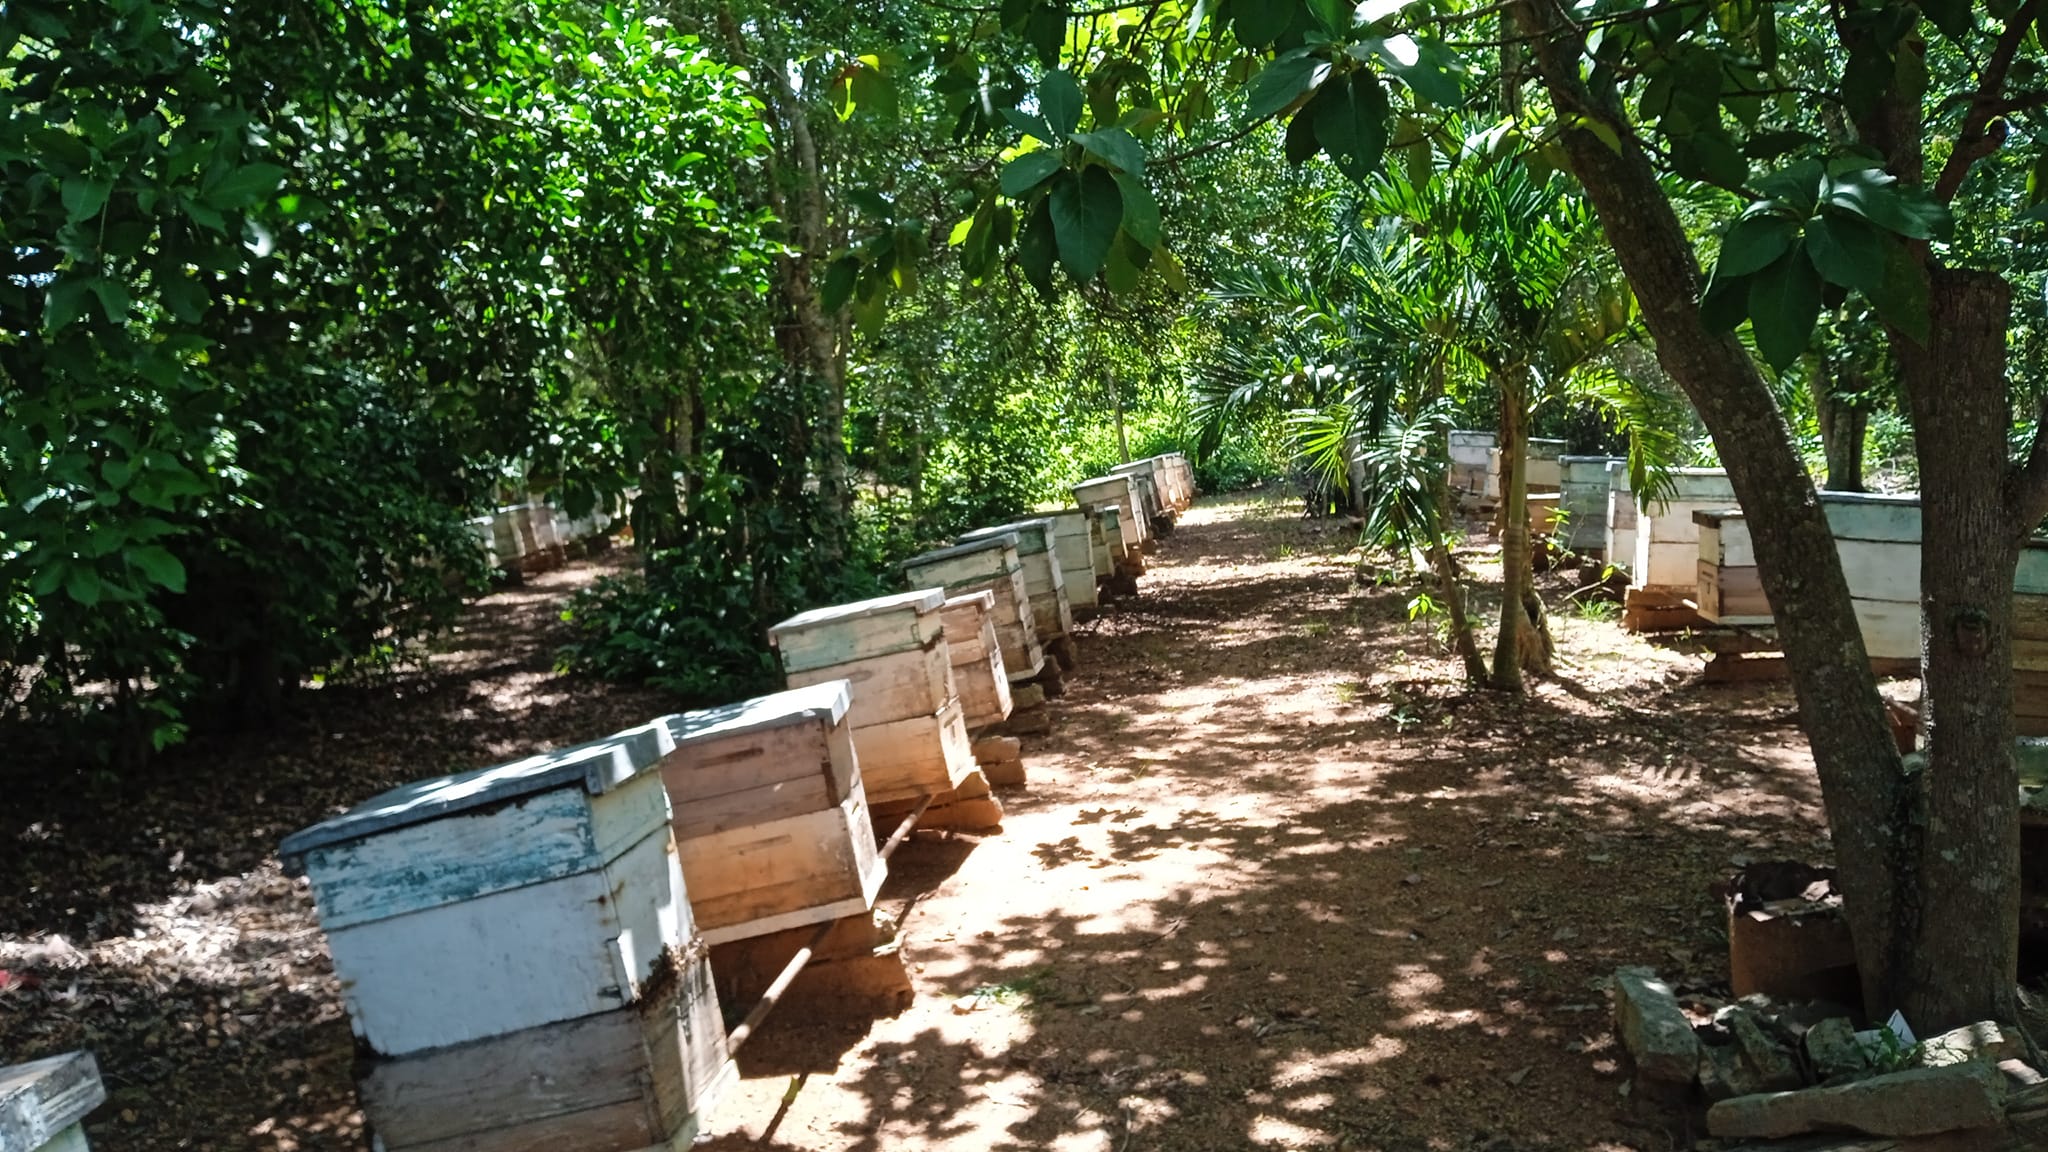 Las Tunas expects to complete 12,530 hives this year